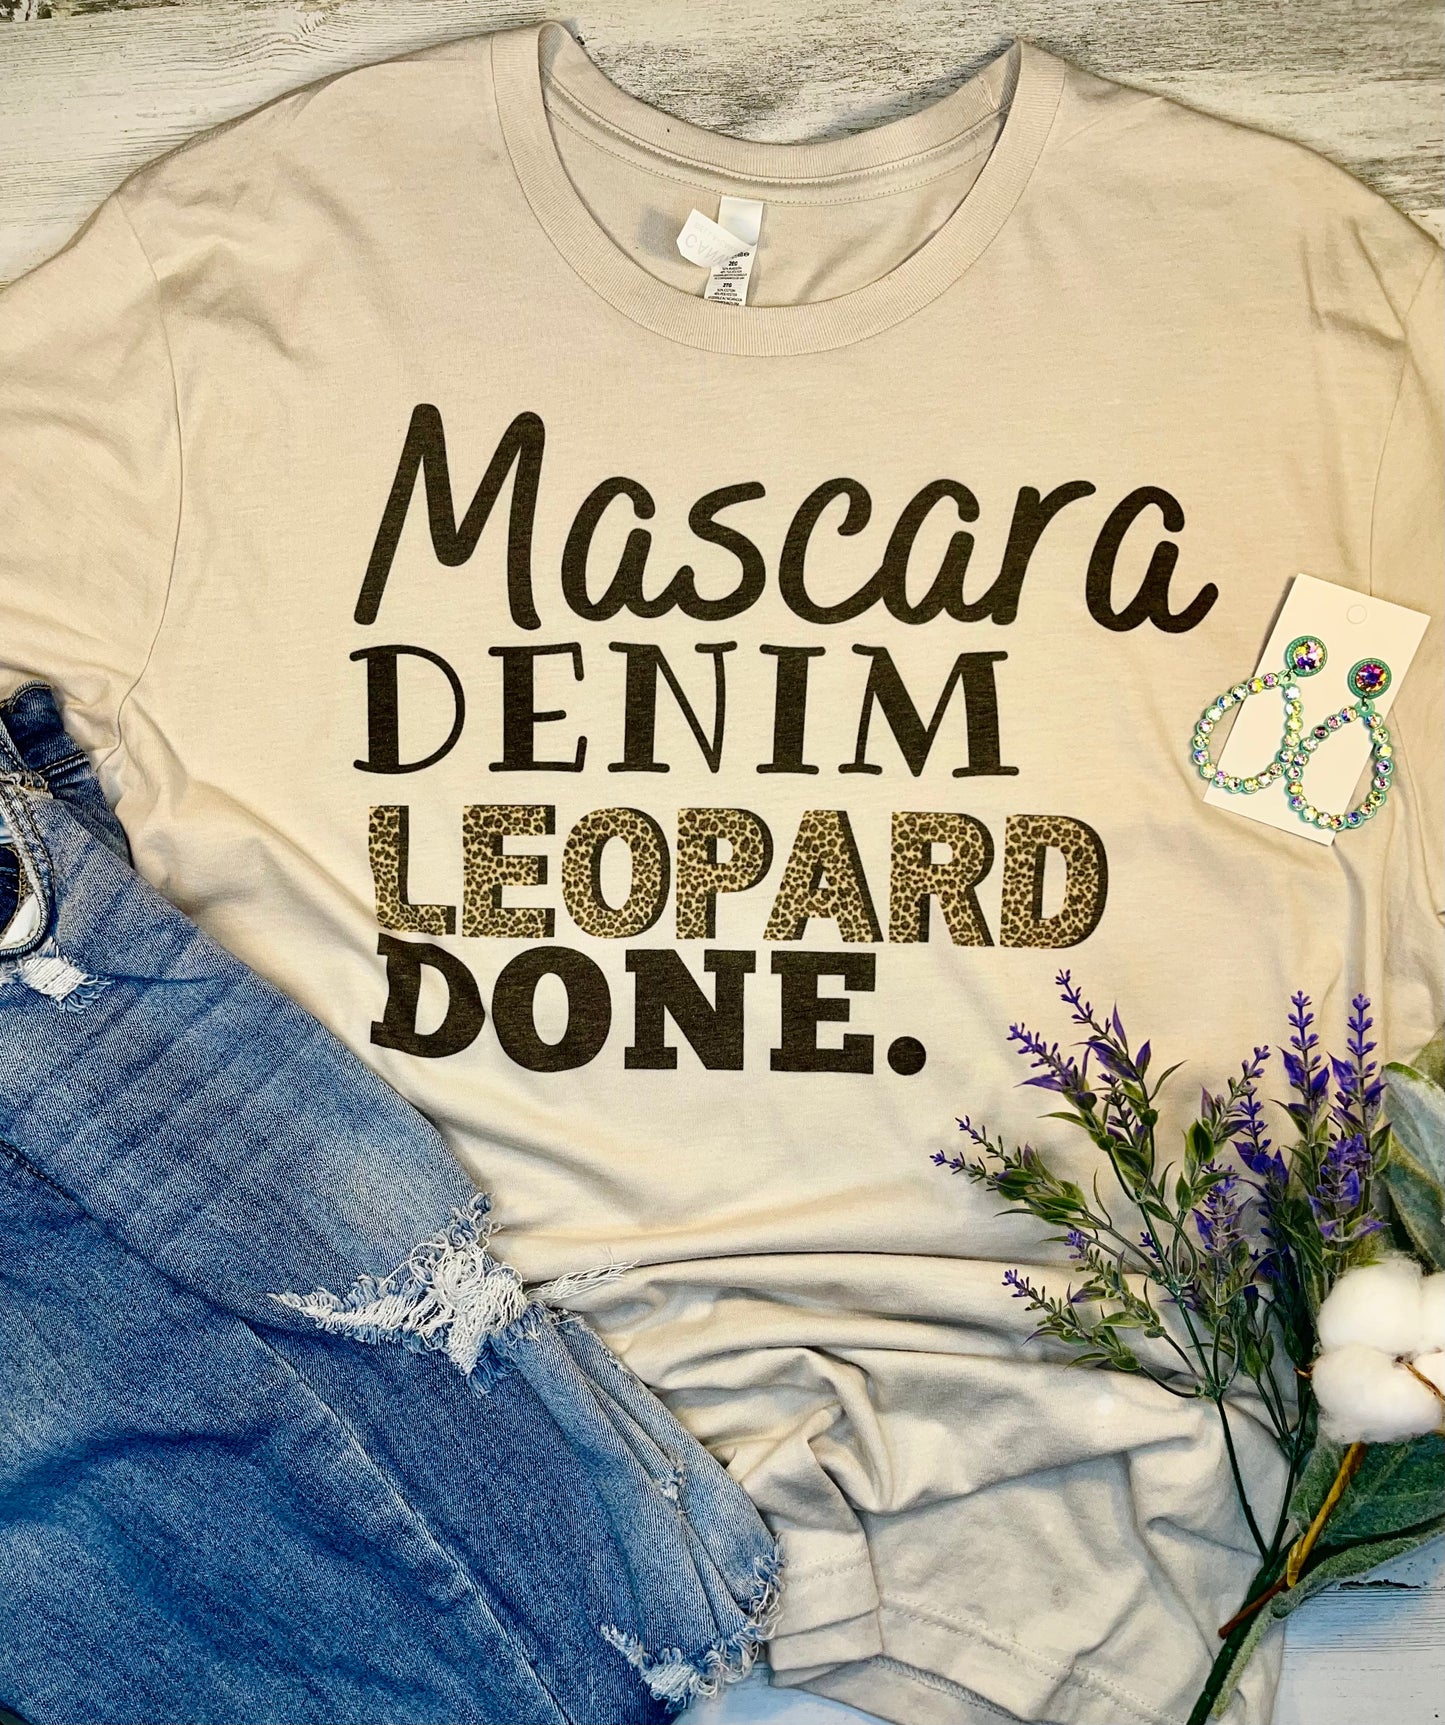 Product details  Custom sublimated tee that reads “Mascara,denim, leopard, done " Pressed on a bella canva shirt Short sleeve  Fits true to size Contact us about a custom color shirt.   *Colors may vary slightly due to monitor resolution and lighting* Southern Bliss Boutique